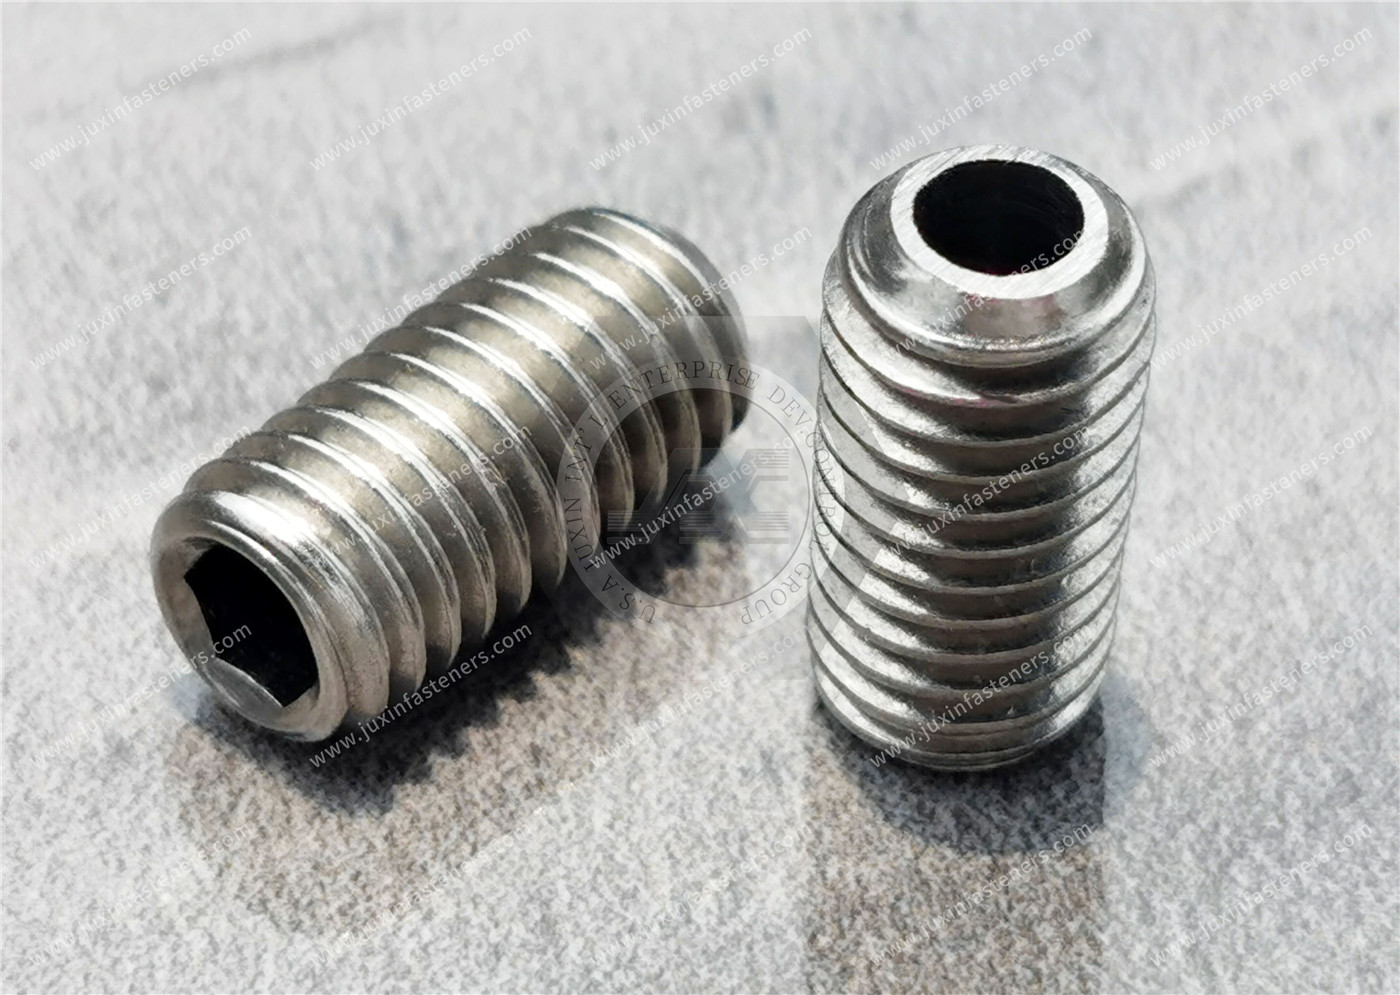 Stainless steel Through hole full thread bolt and Stainless Steel Hollow-Lock Set Screws